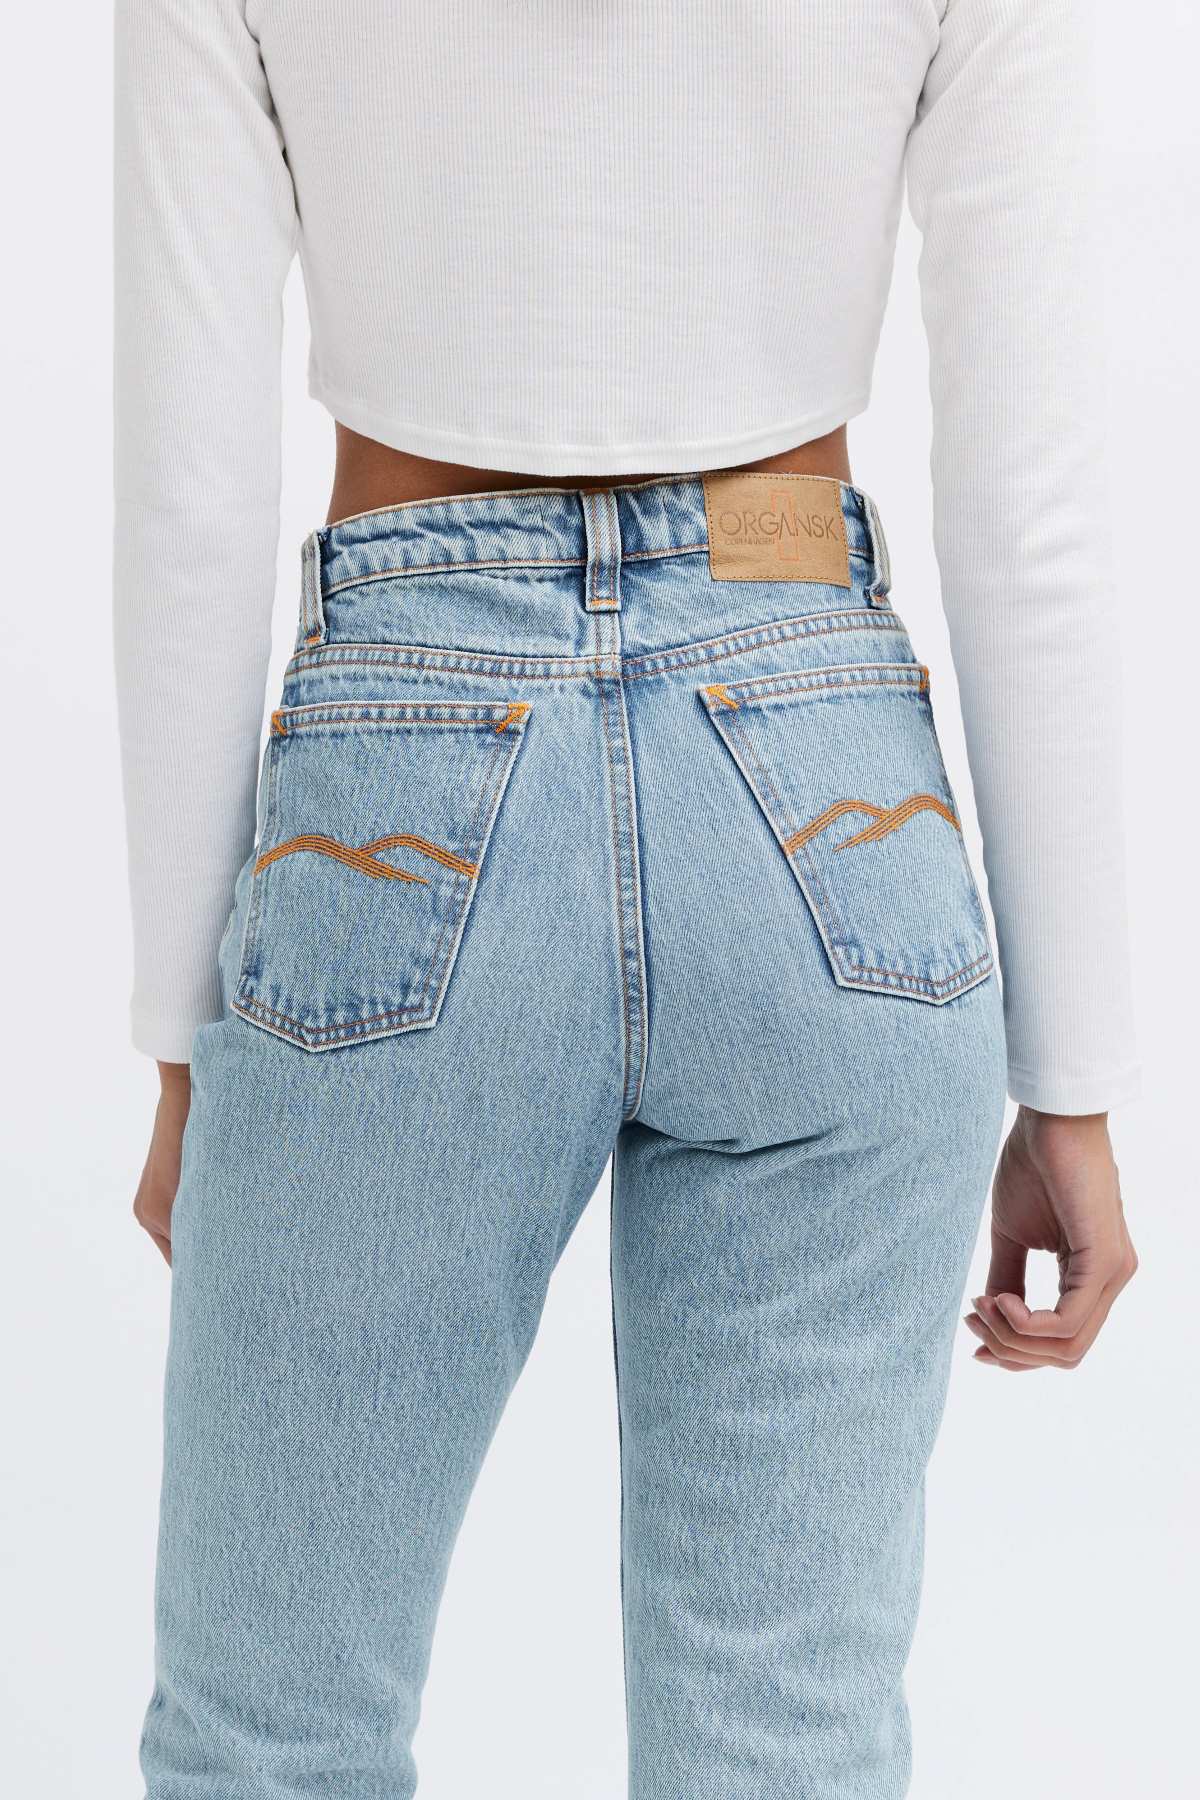 Organic, ethical and vegan jeans for women